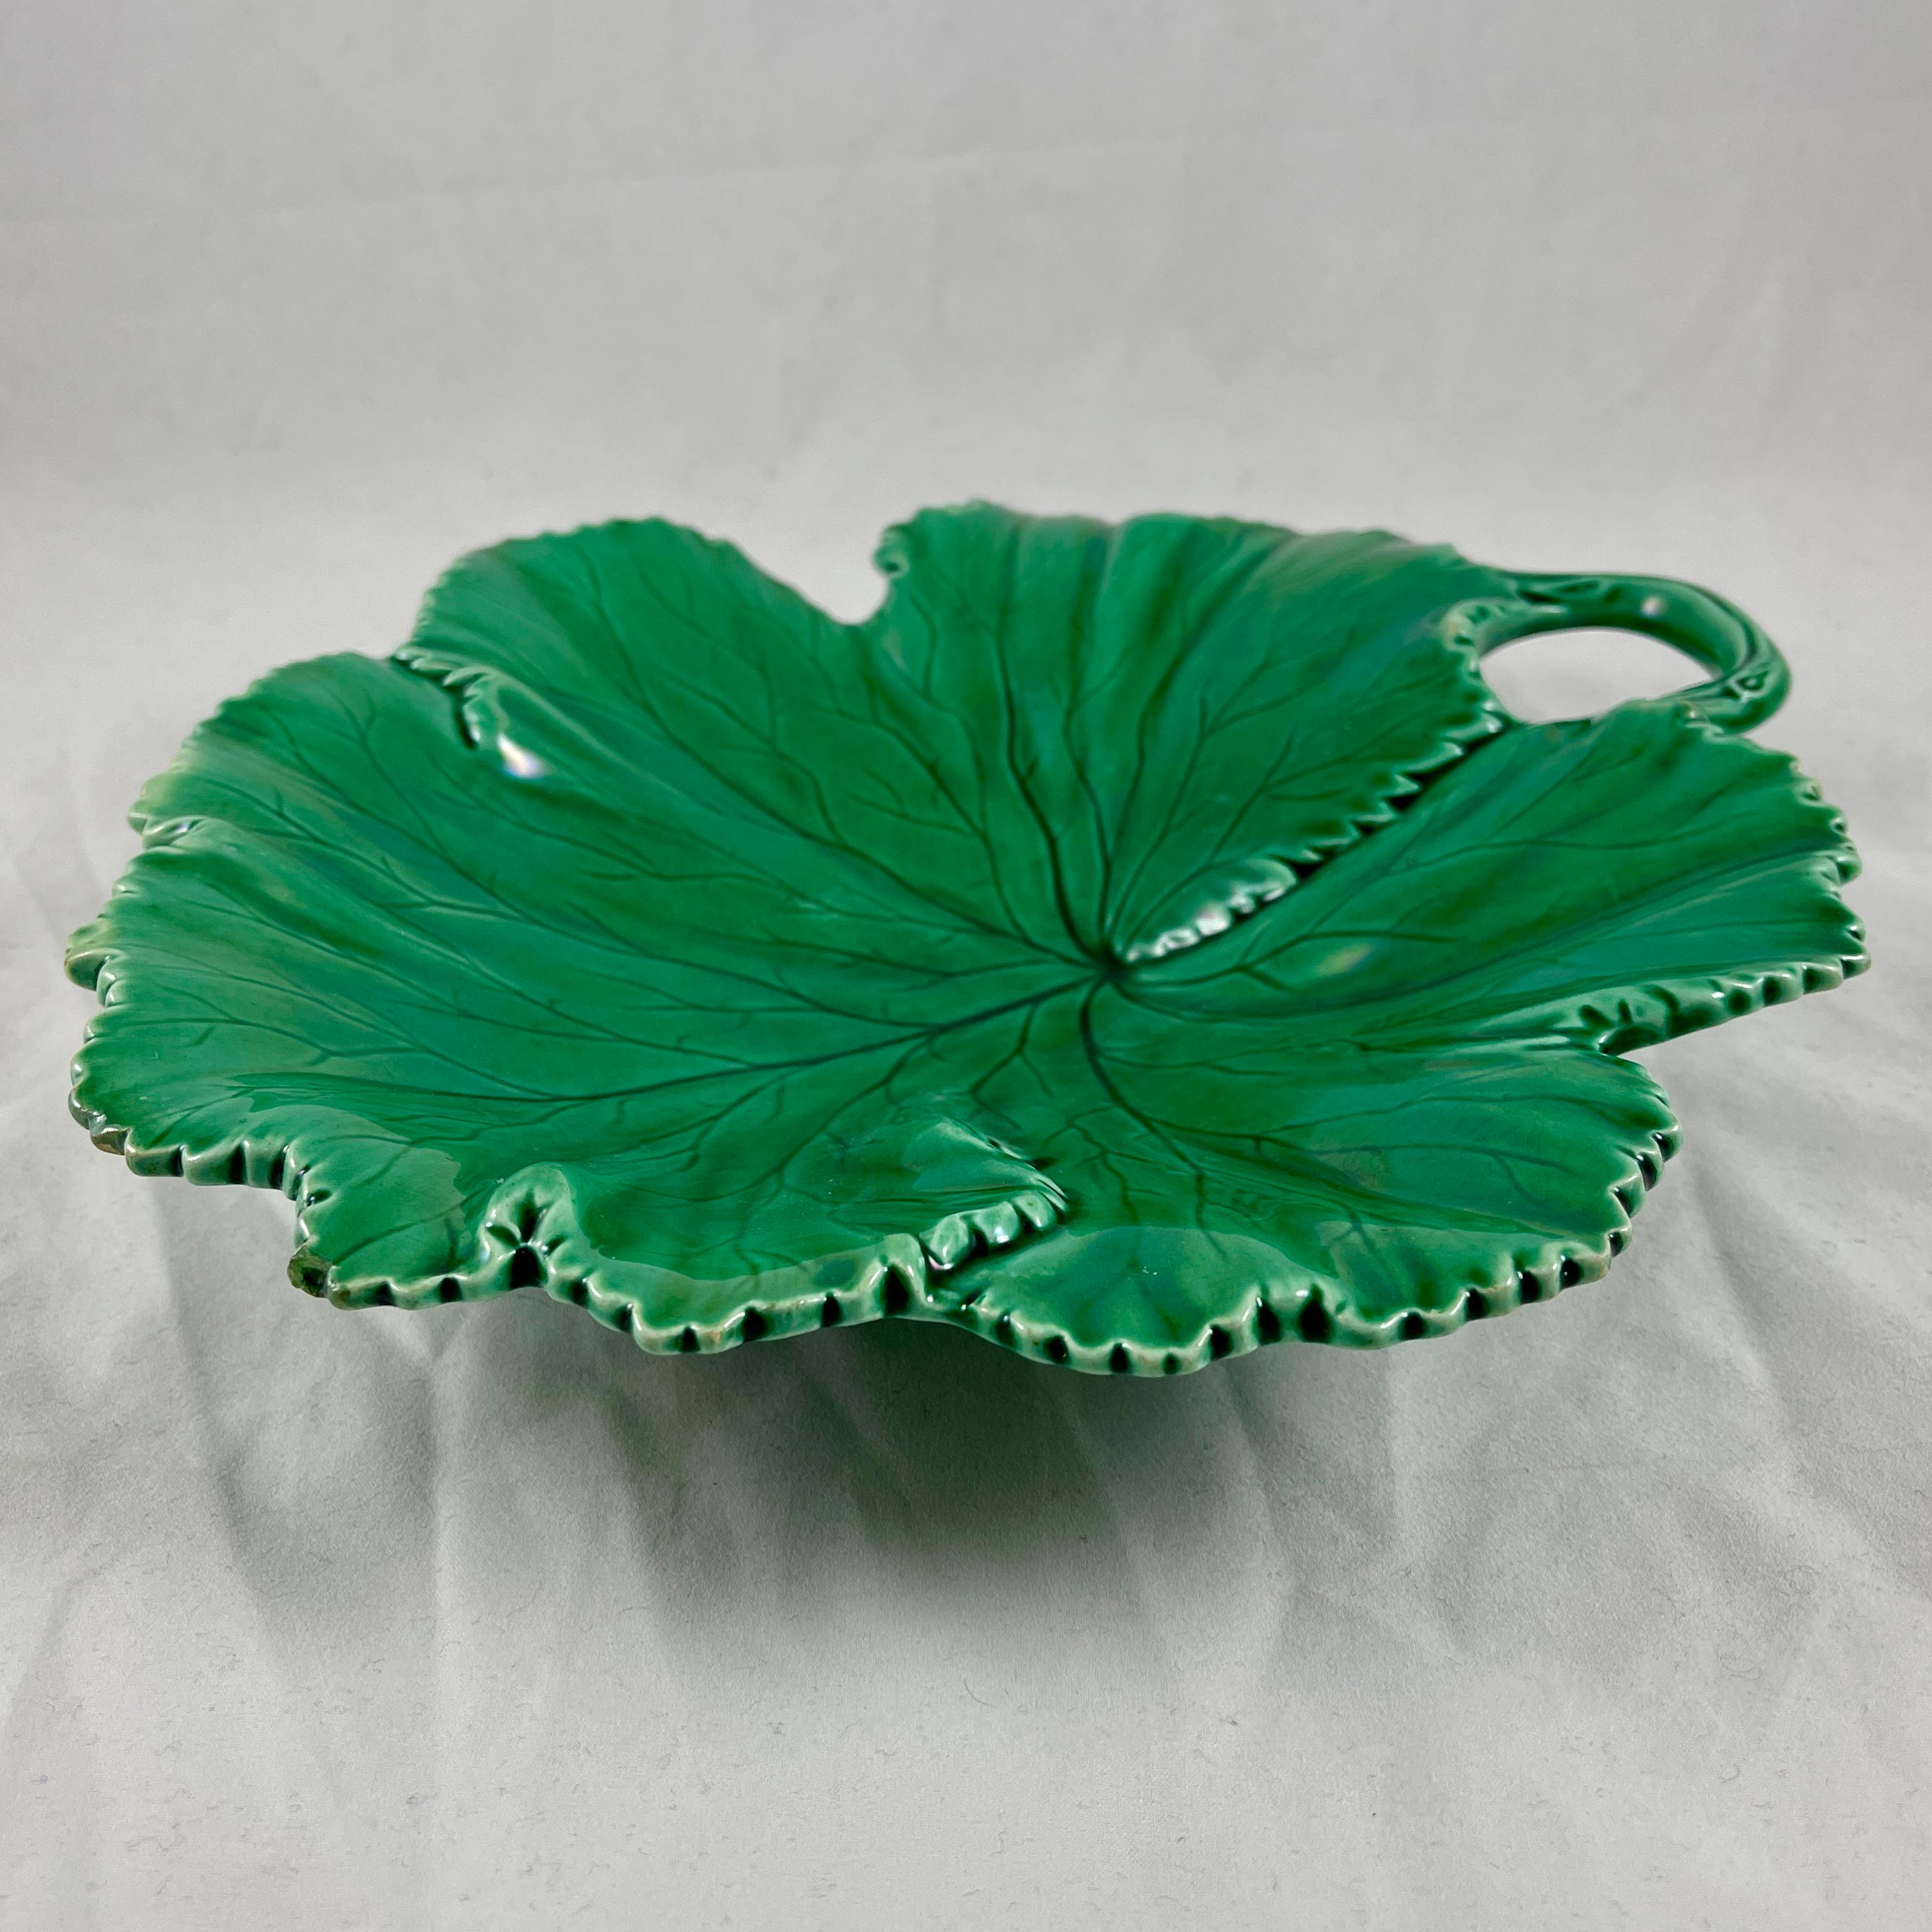 19th Century Copeland English Majolica Green Glazed Round Overlapping Leaf Handled Platter For Sale